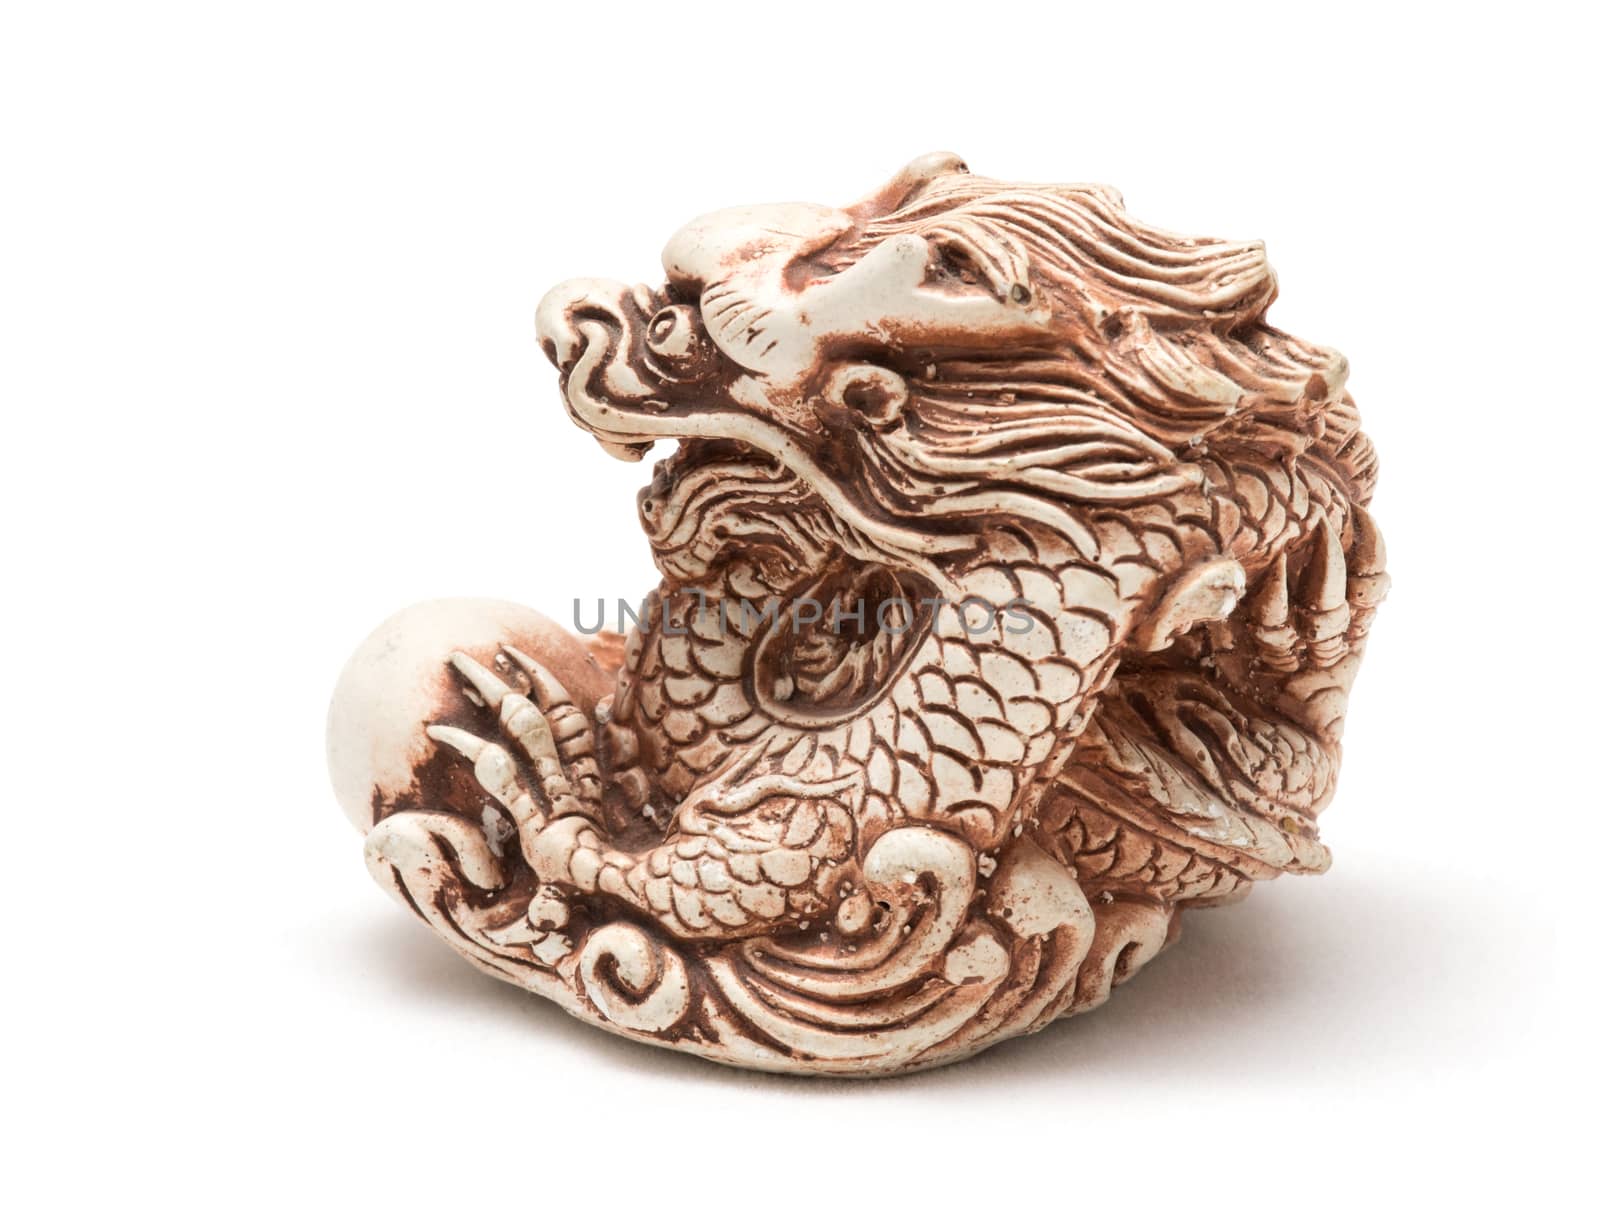 Netsuke of east dragon, which guarding the egg. A miniature sculpture, which was used as a button-like trinket in traditional Japanese clothes kimono kosode, which was devoid of pockets.